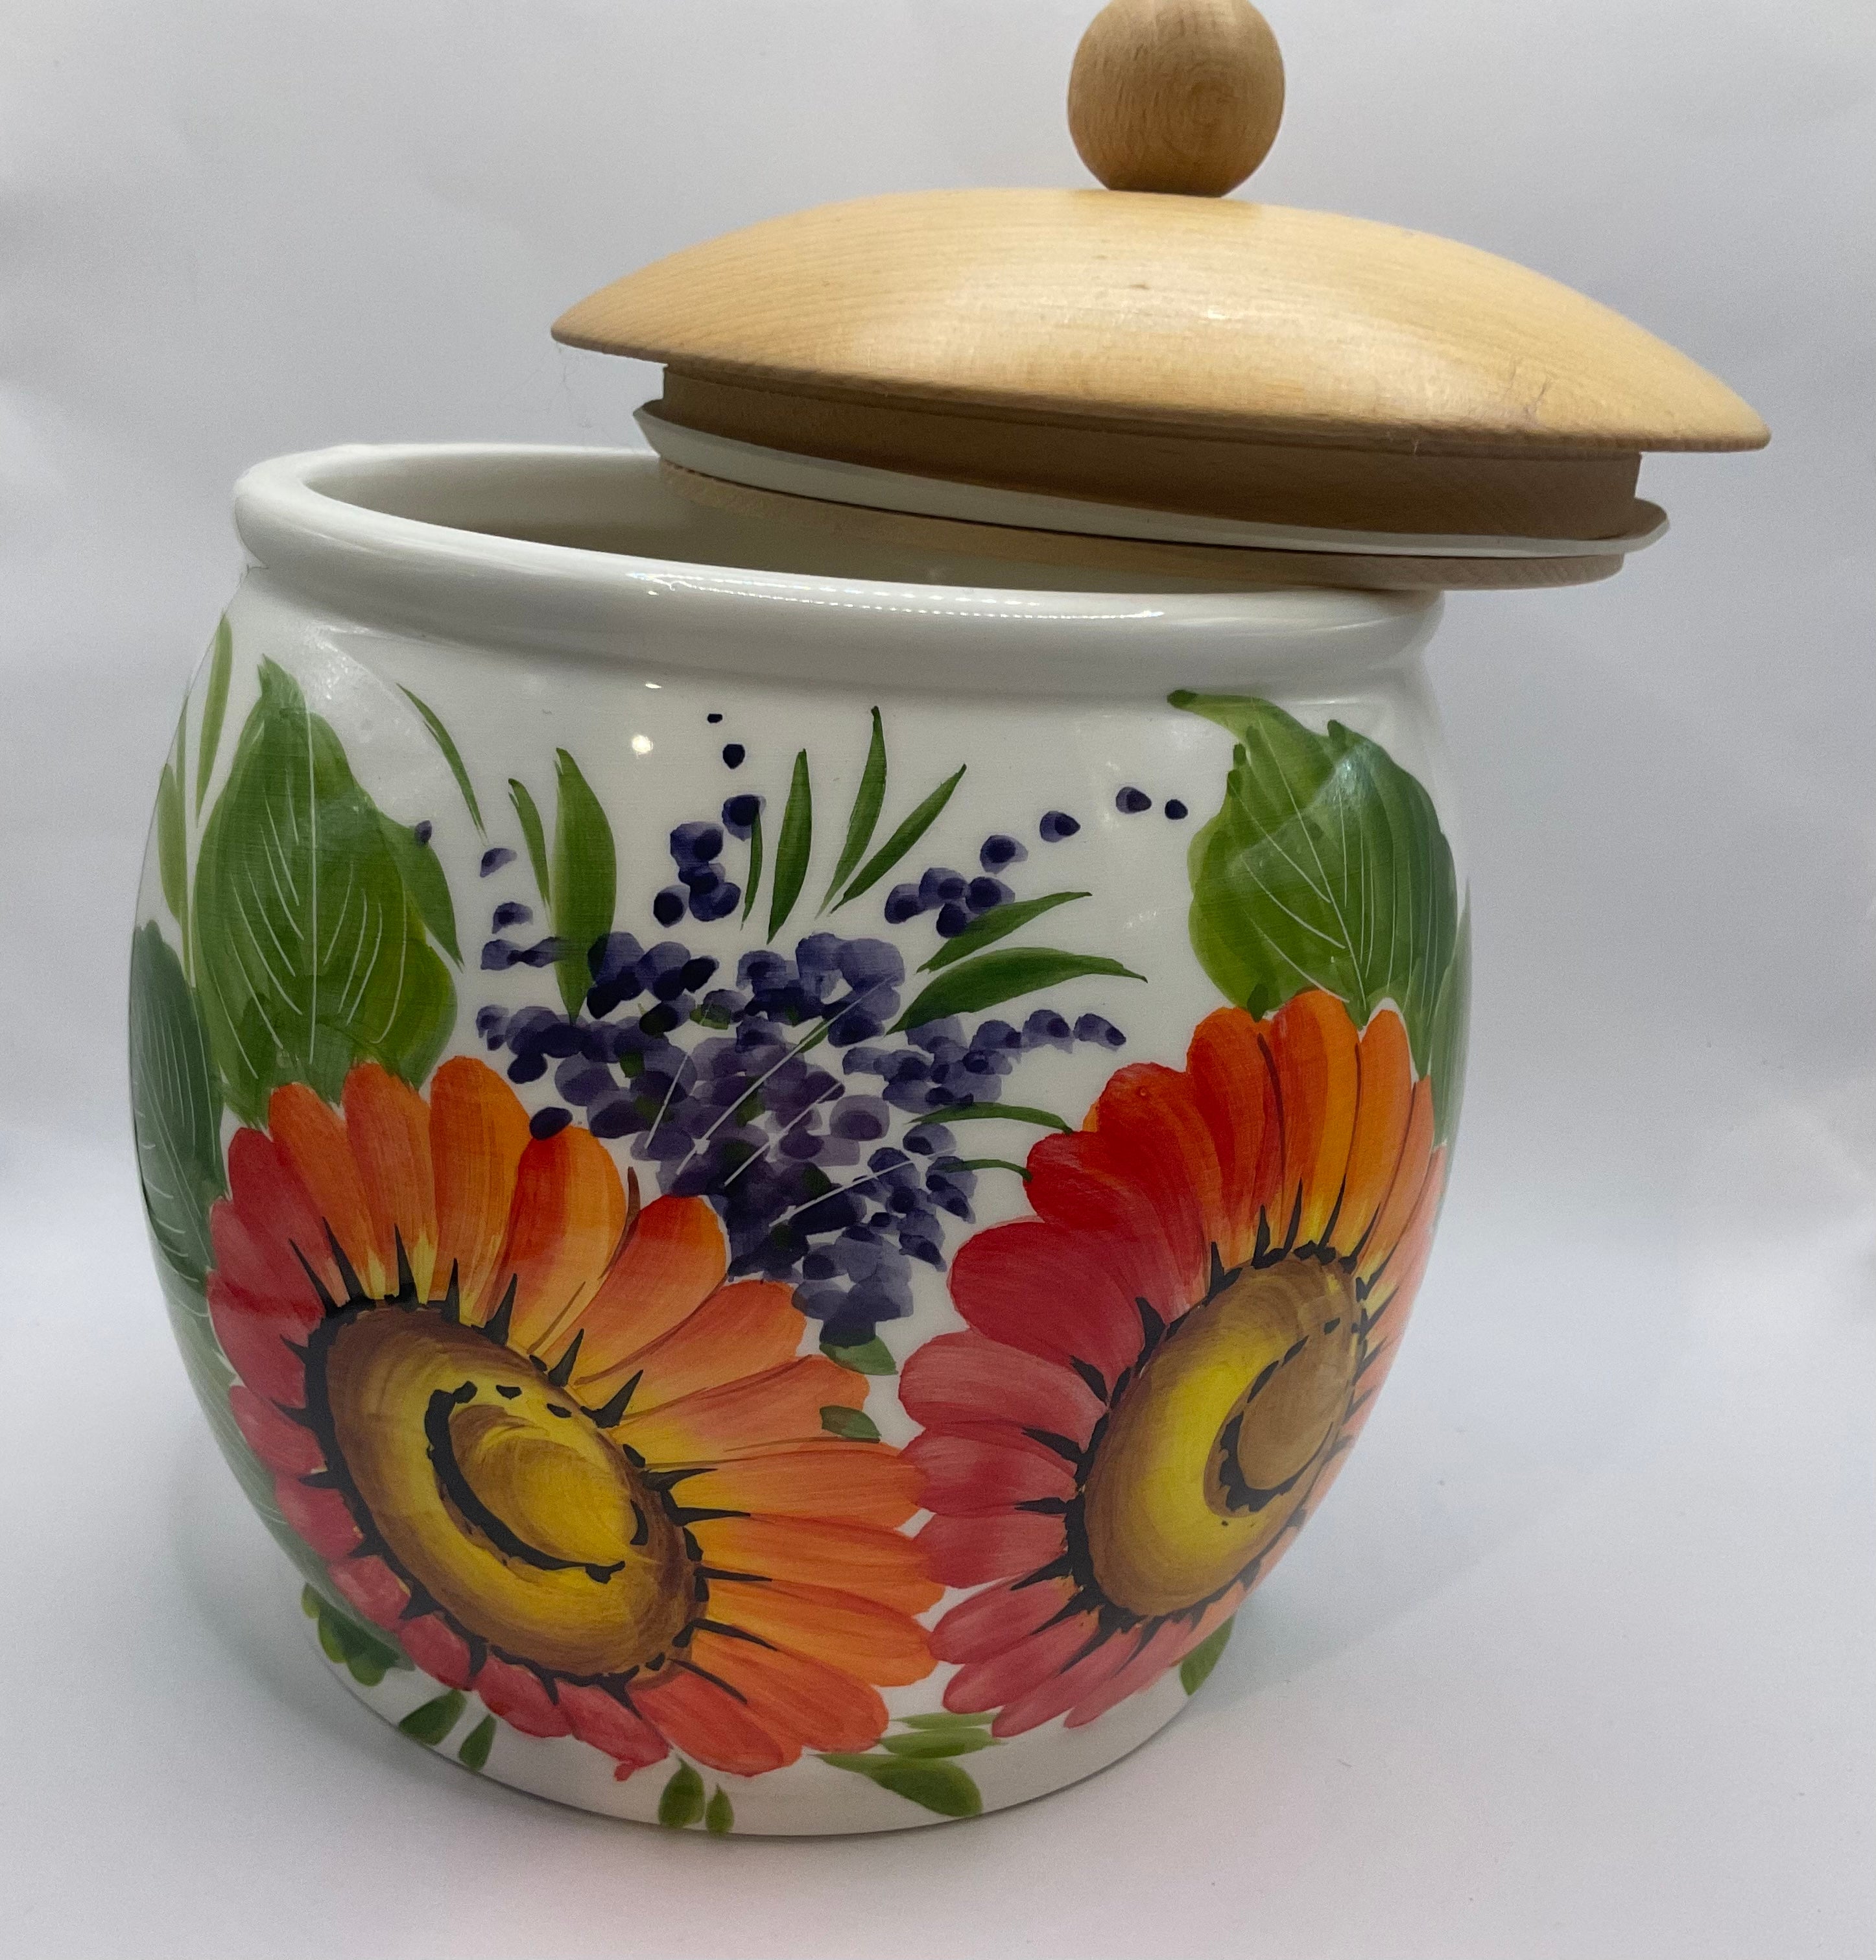 Large Biscotti Jar with Red Sunflower Gerber